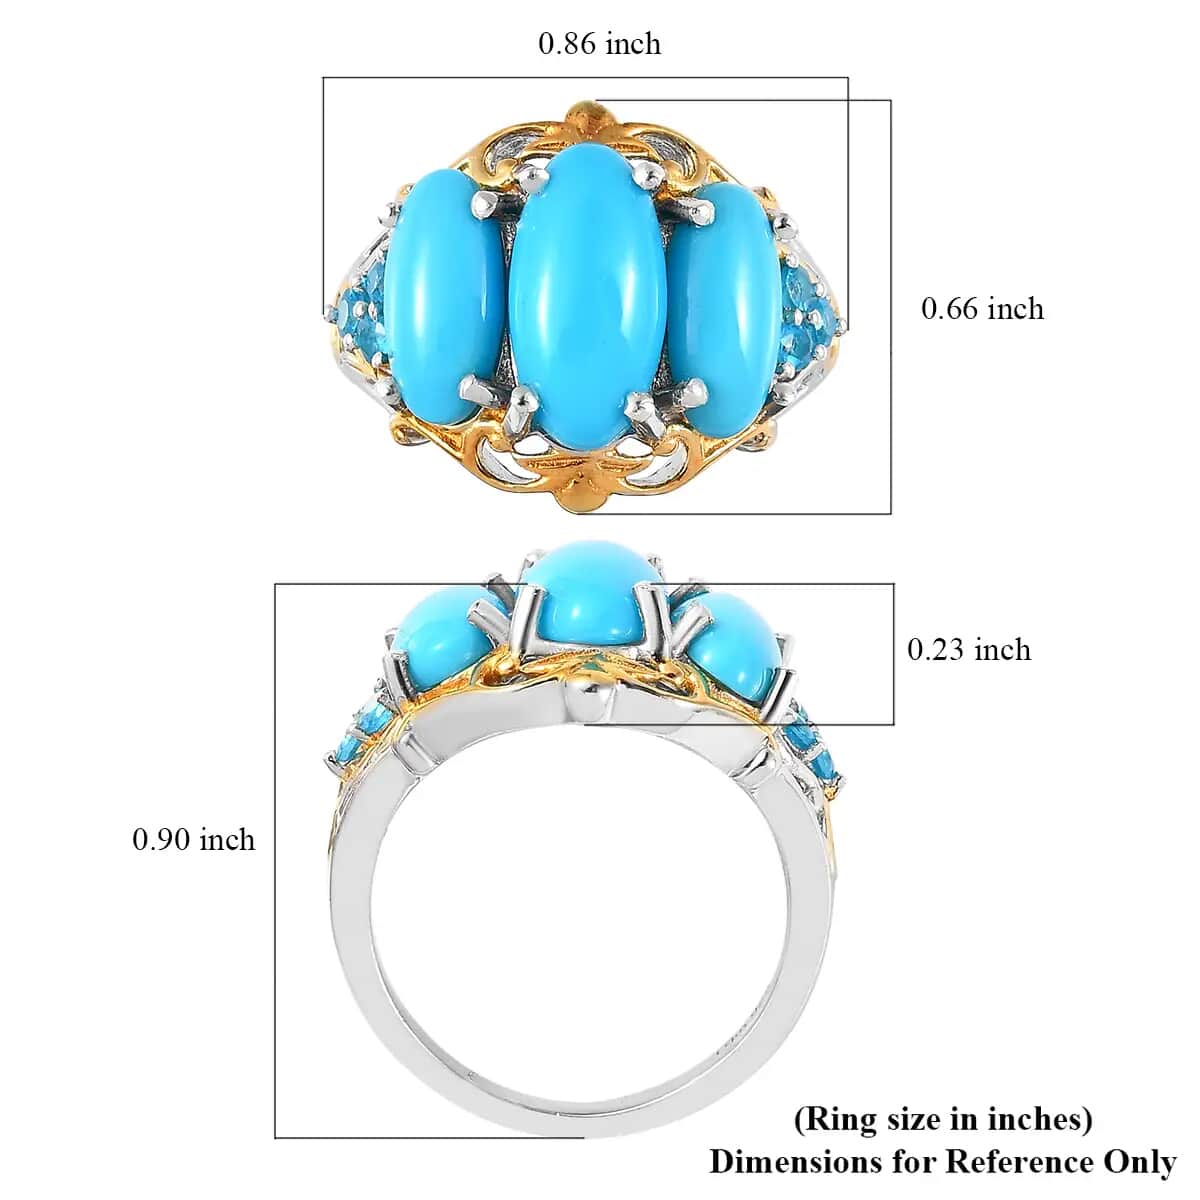 Premium Sleeping Beauty Turquoise Ring with Malgache Neon Apatite in  Vermeil YG and Platinum Over Sterling Silver, Statement Rings For Women  4.50 ctw